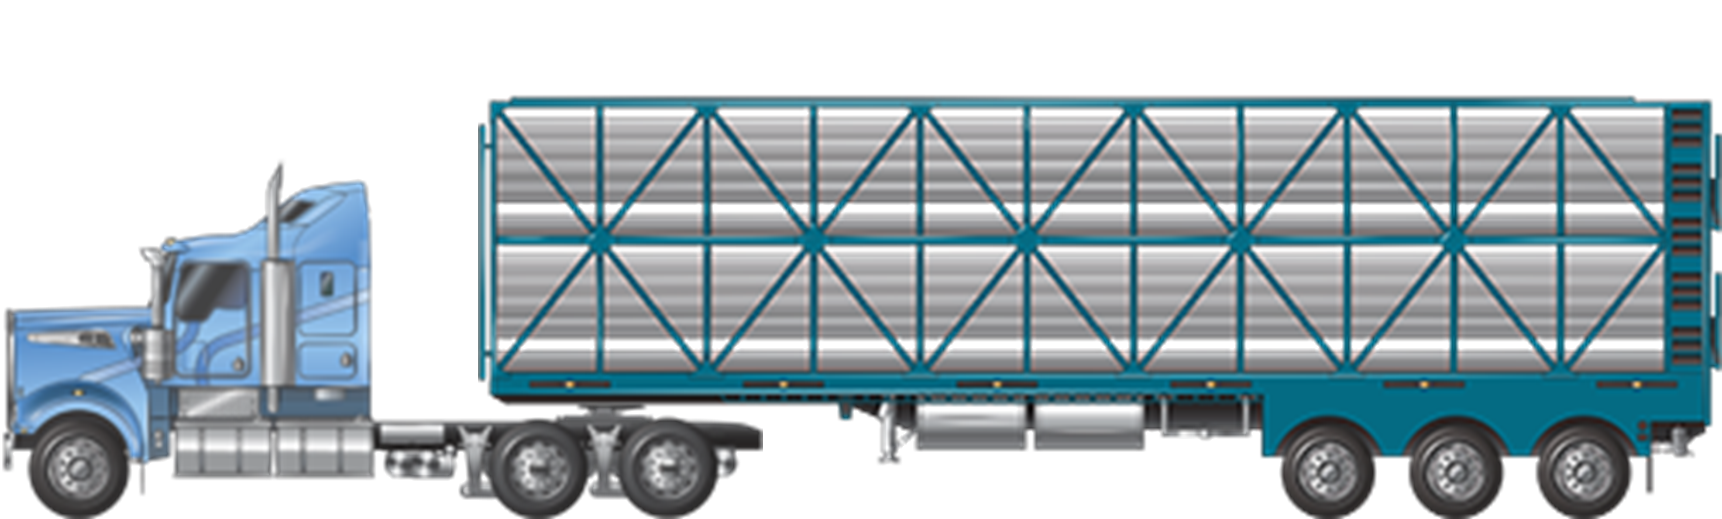 a prime mover and semitrailer combination, used for carrying cattle, pigs, sheep or goats example